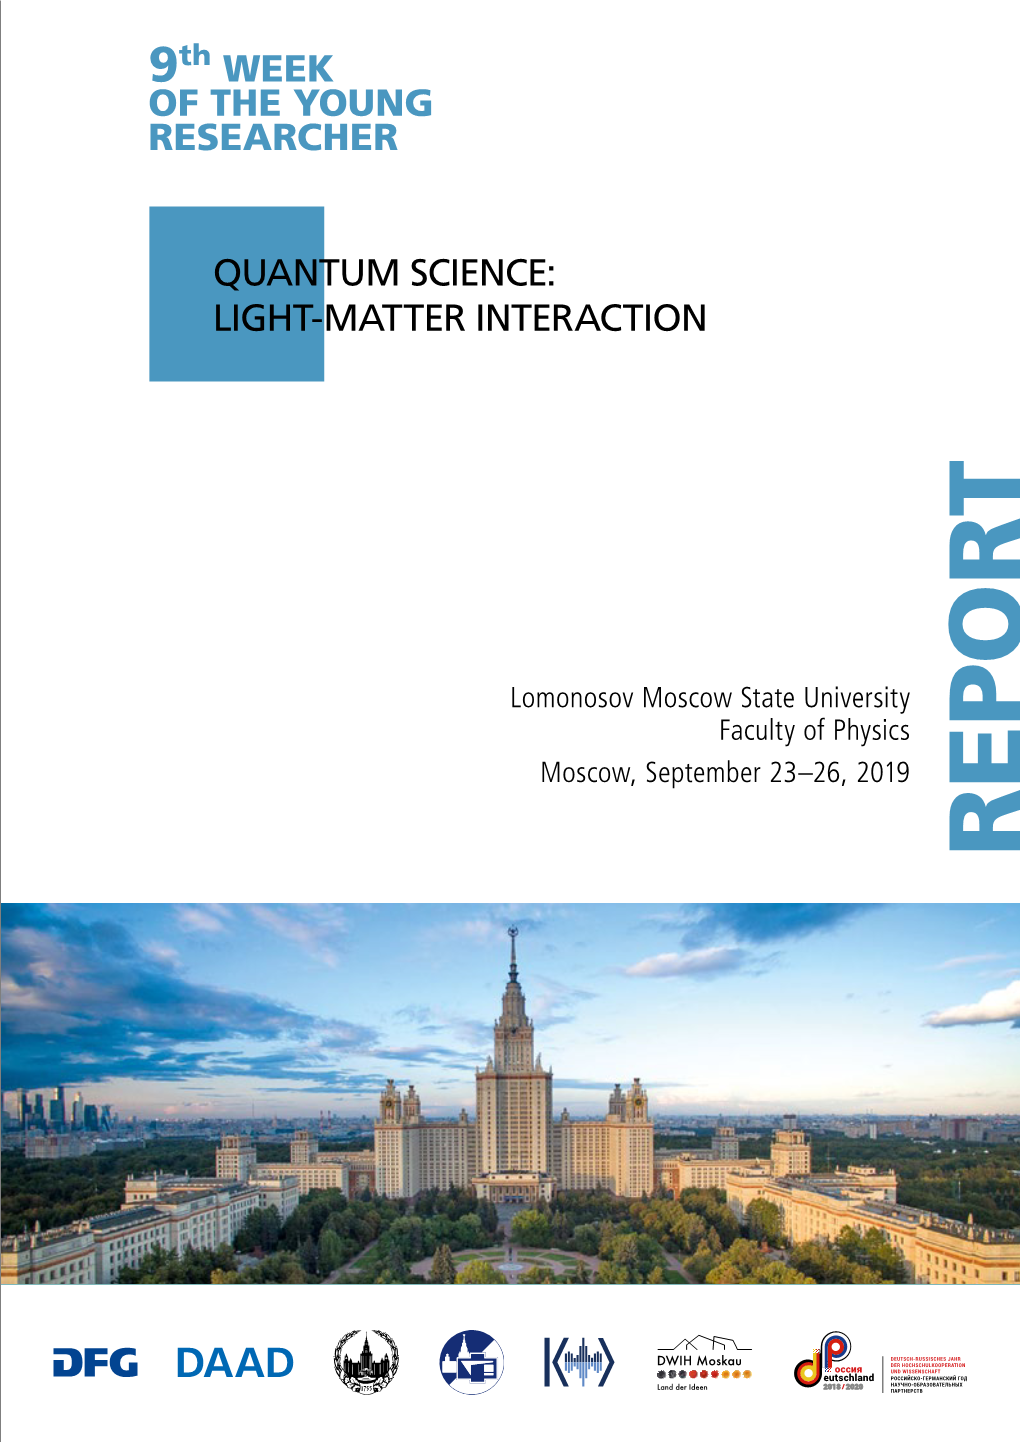 Week of the Young Researcher Quantum Science